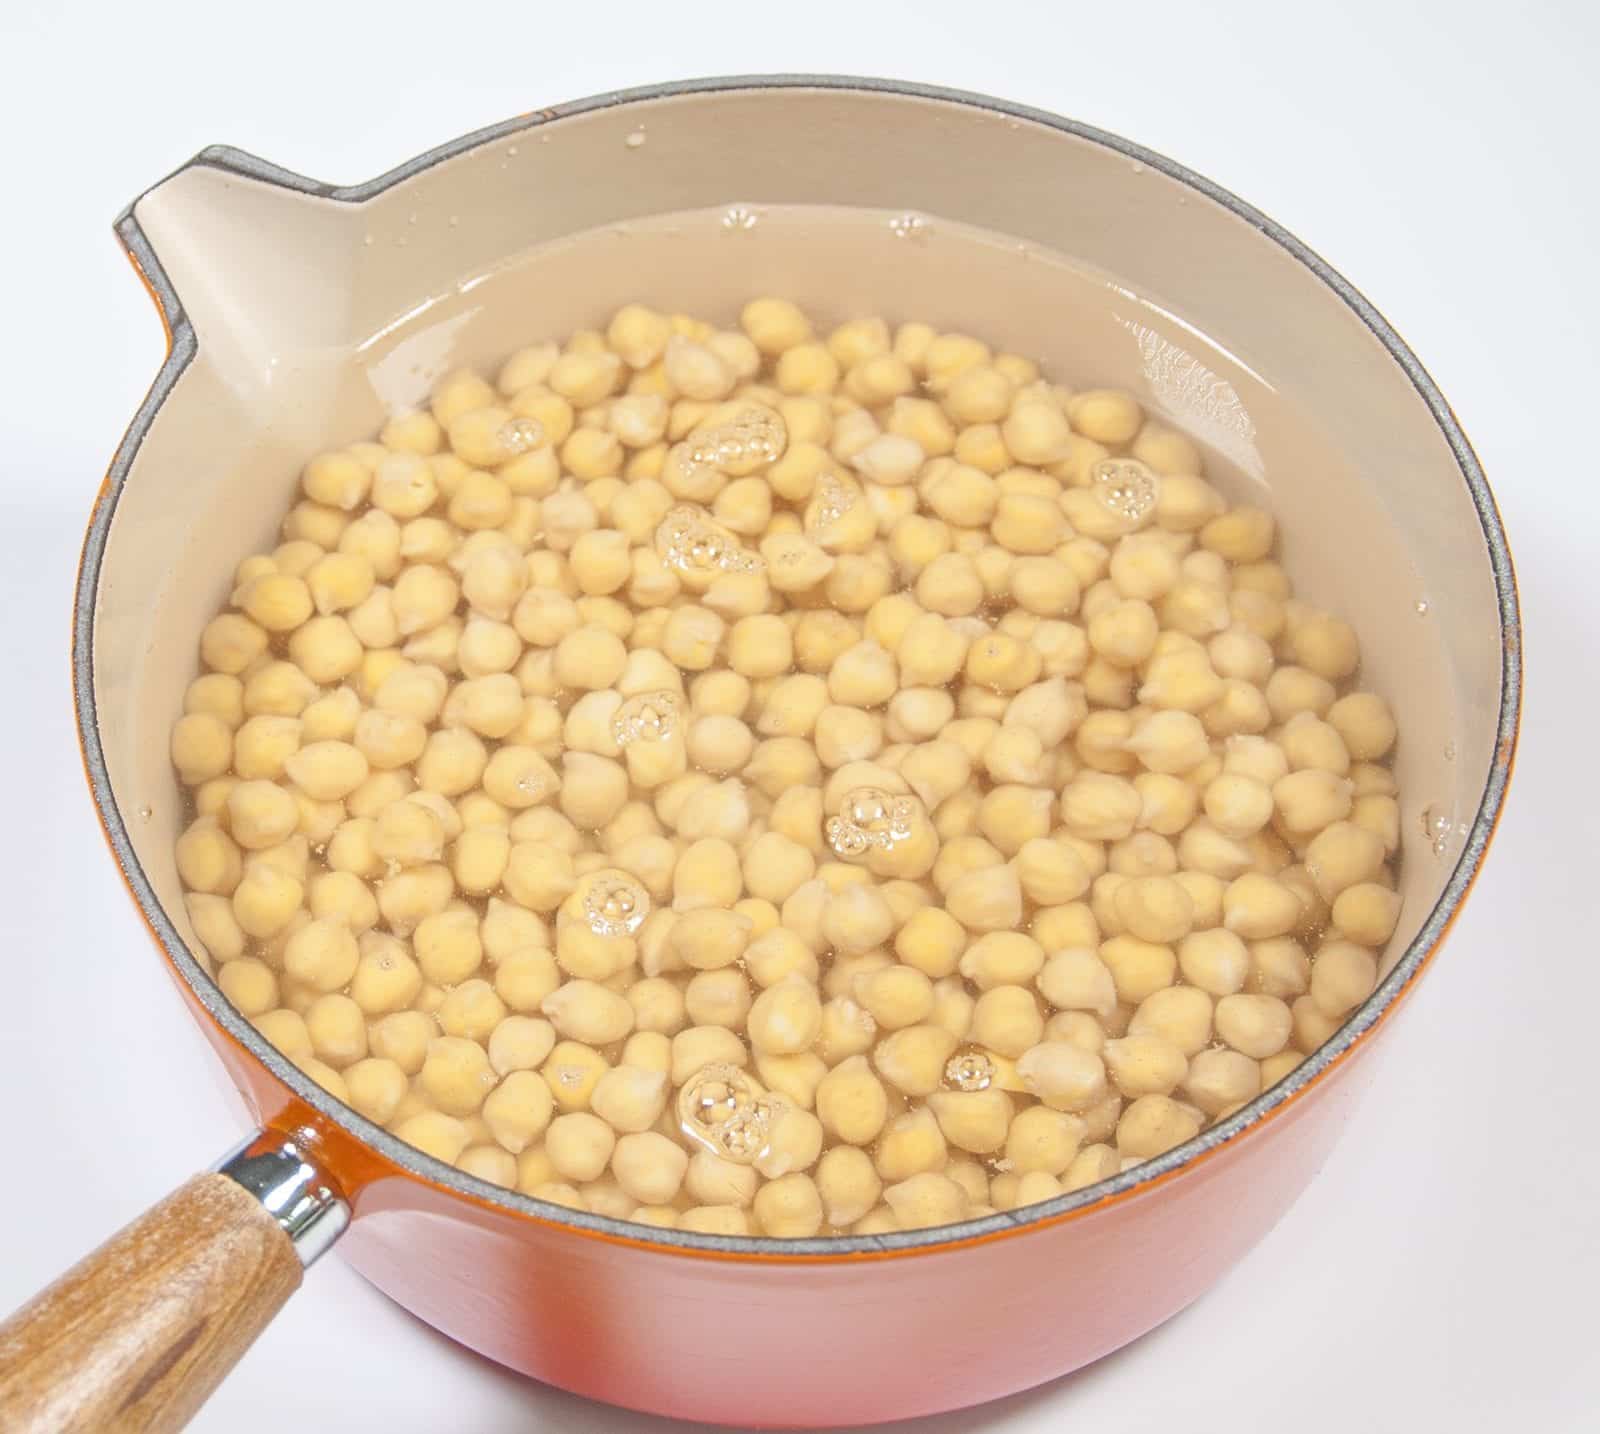 Boil for 45 minutes | https://theyumyumclub.com/2019/06/18/moroccan-chickpea-salad/